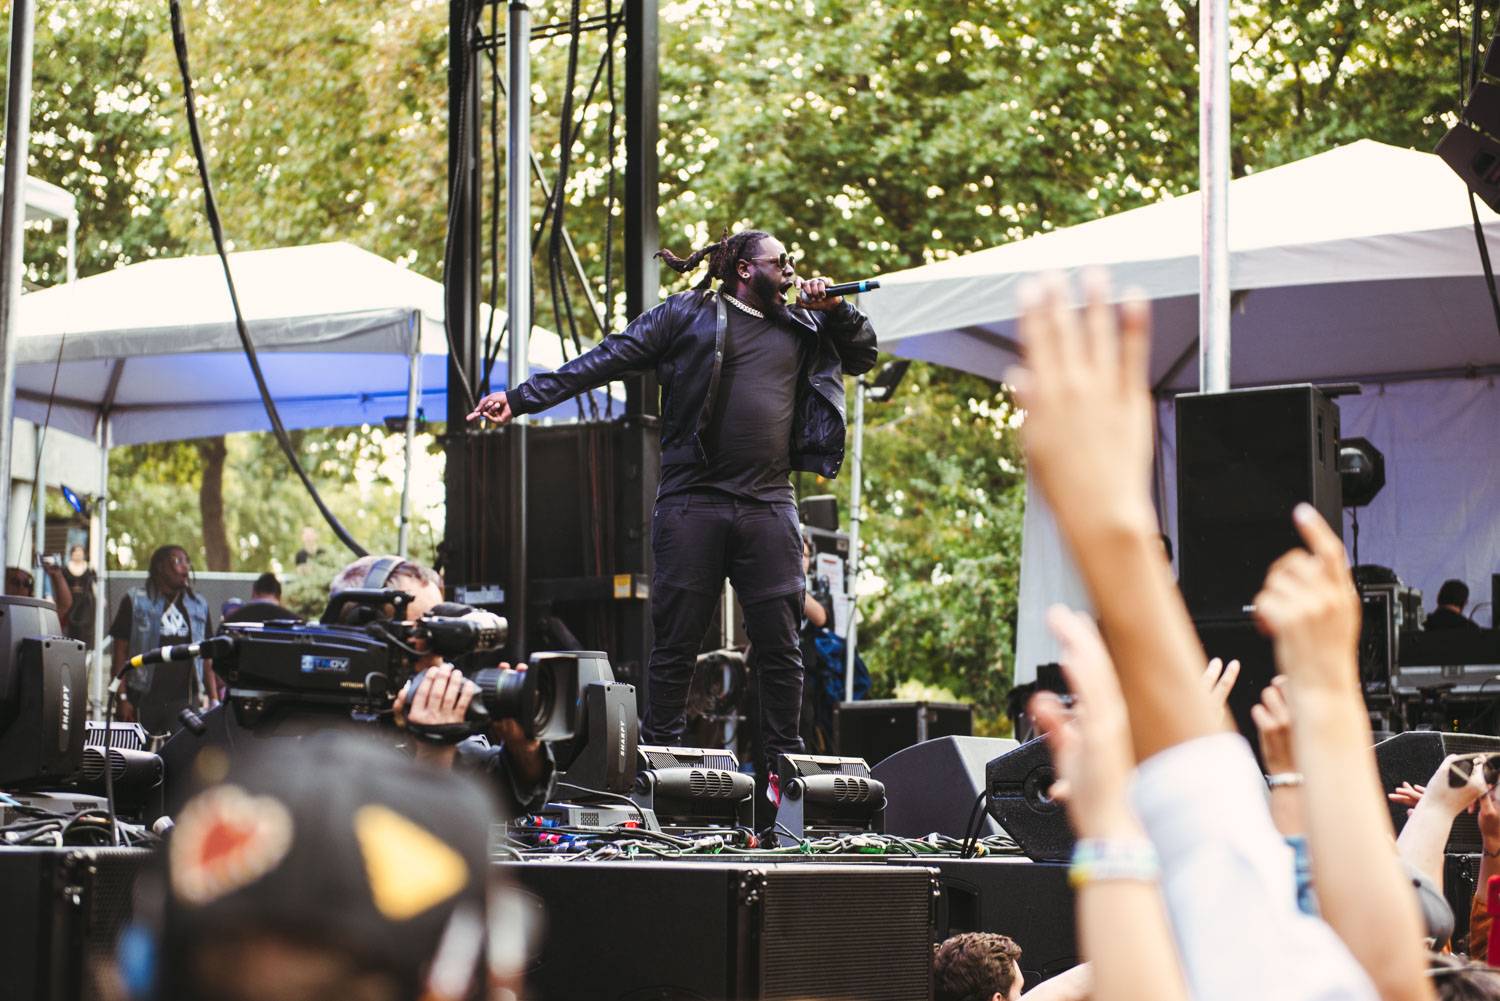 T-Pain at the Bumbershoot Music Festival 2018 - Day 2. Sept 1 2018. Pavel Boiko photo.